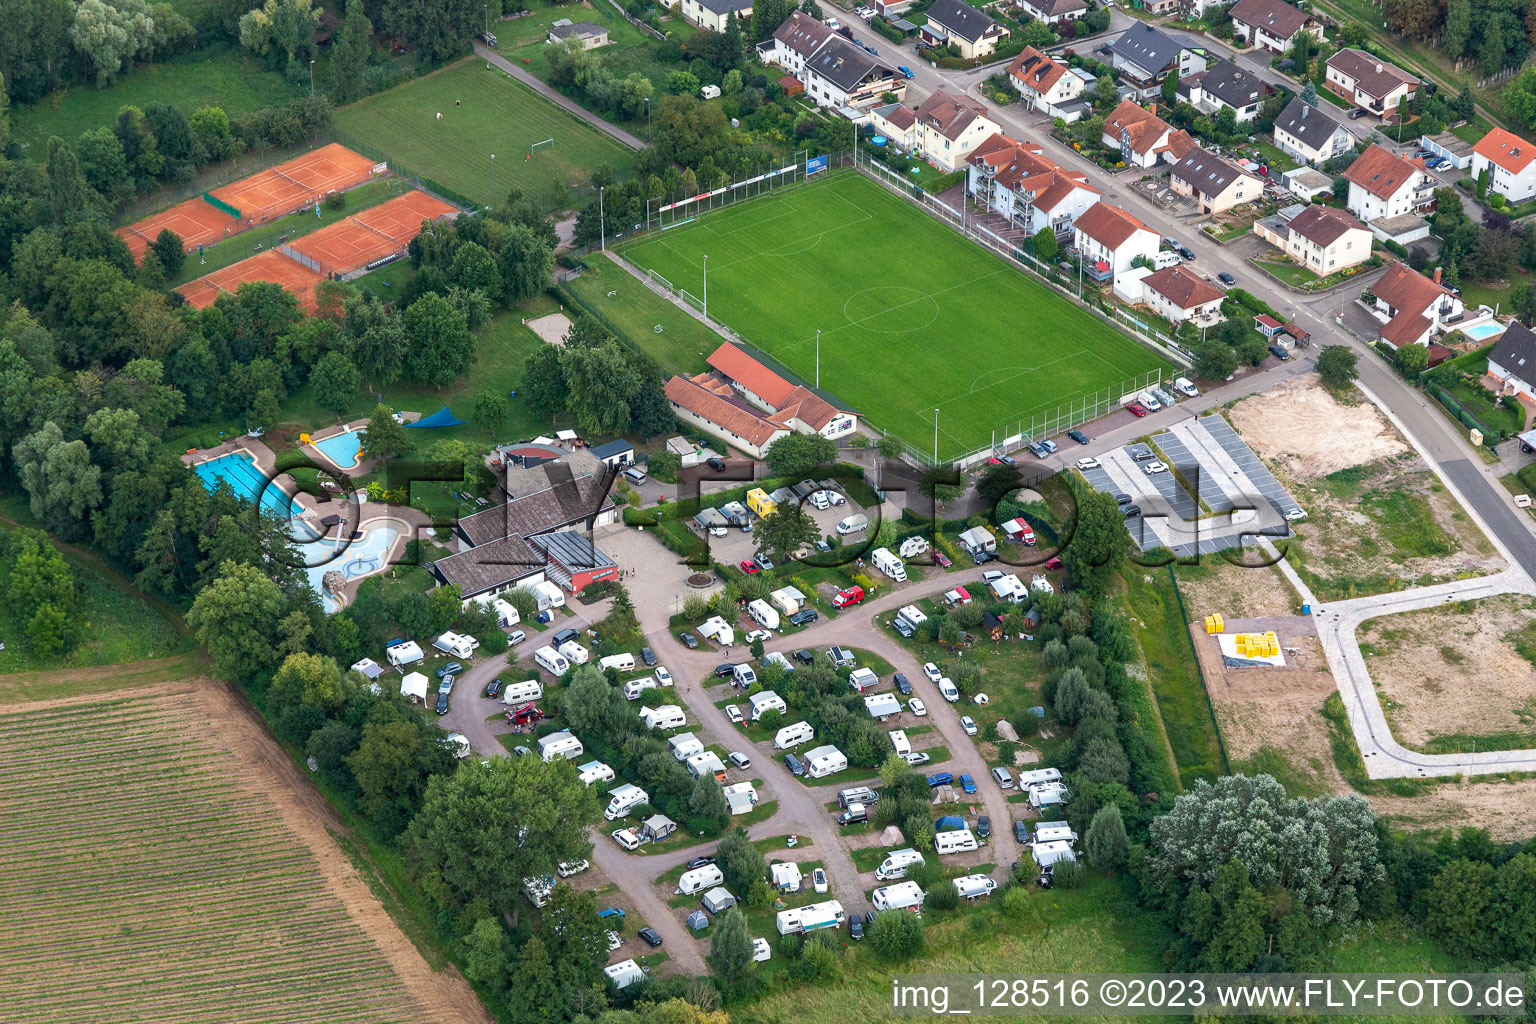 Camping Klingbachtal with caravans and tents in Billigheim-Ingenheim in the state Rhineland-Palatinate, Germany